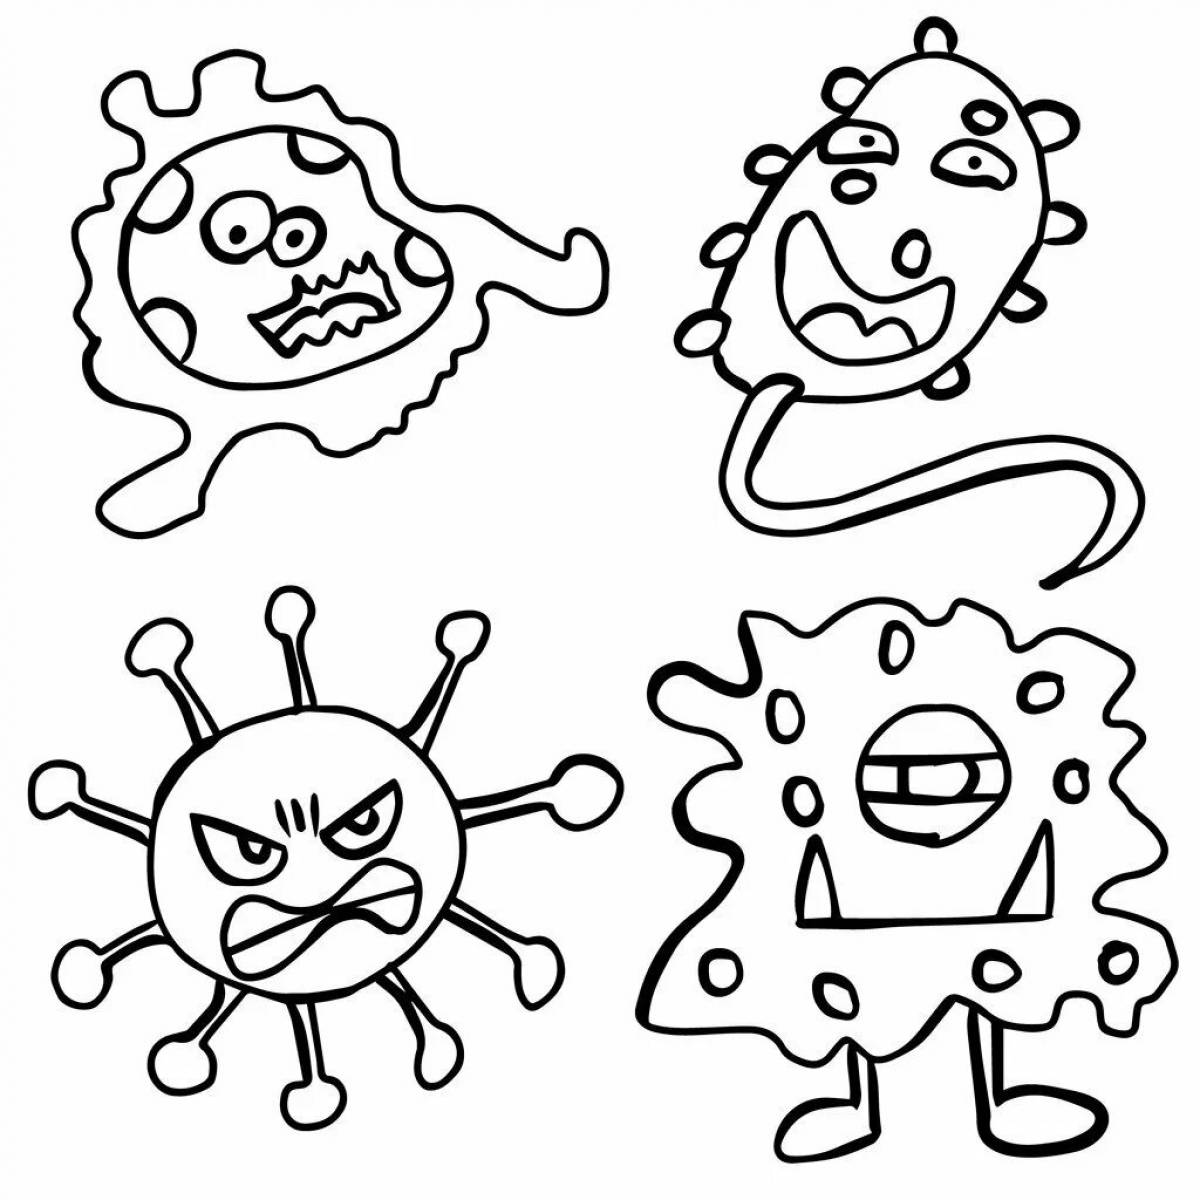 Viruses and germs for kids #7